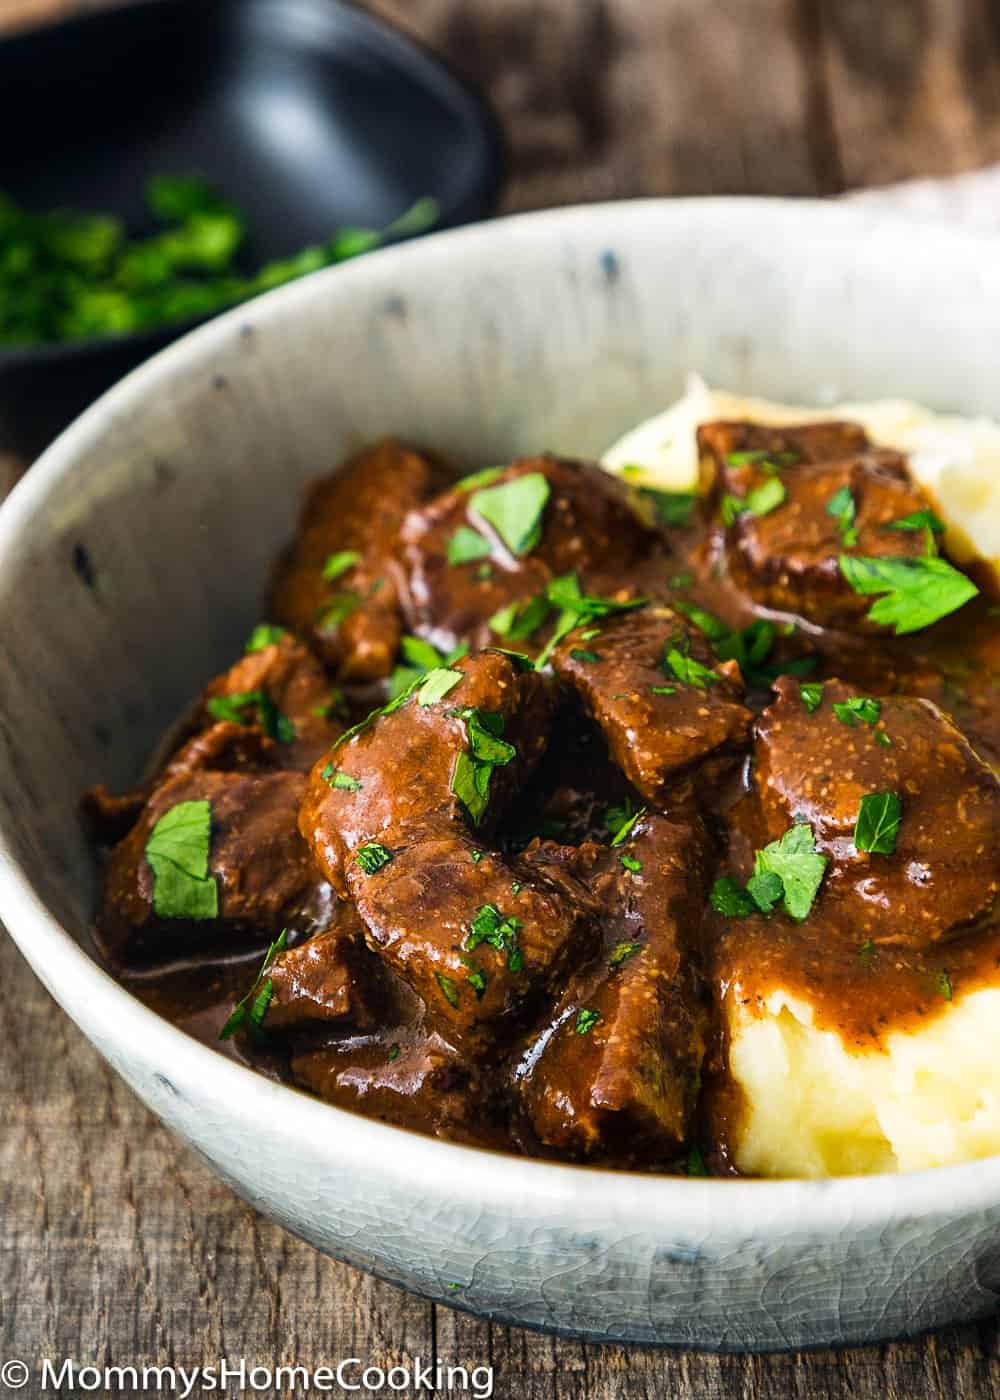  Beef Tips and mashed potatoes garnished with chopped parsley